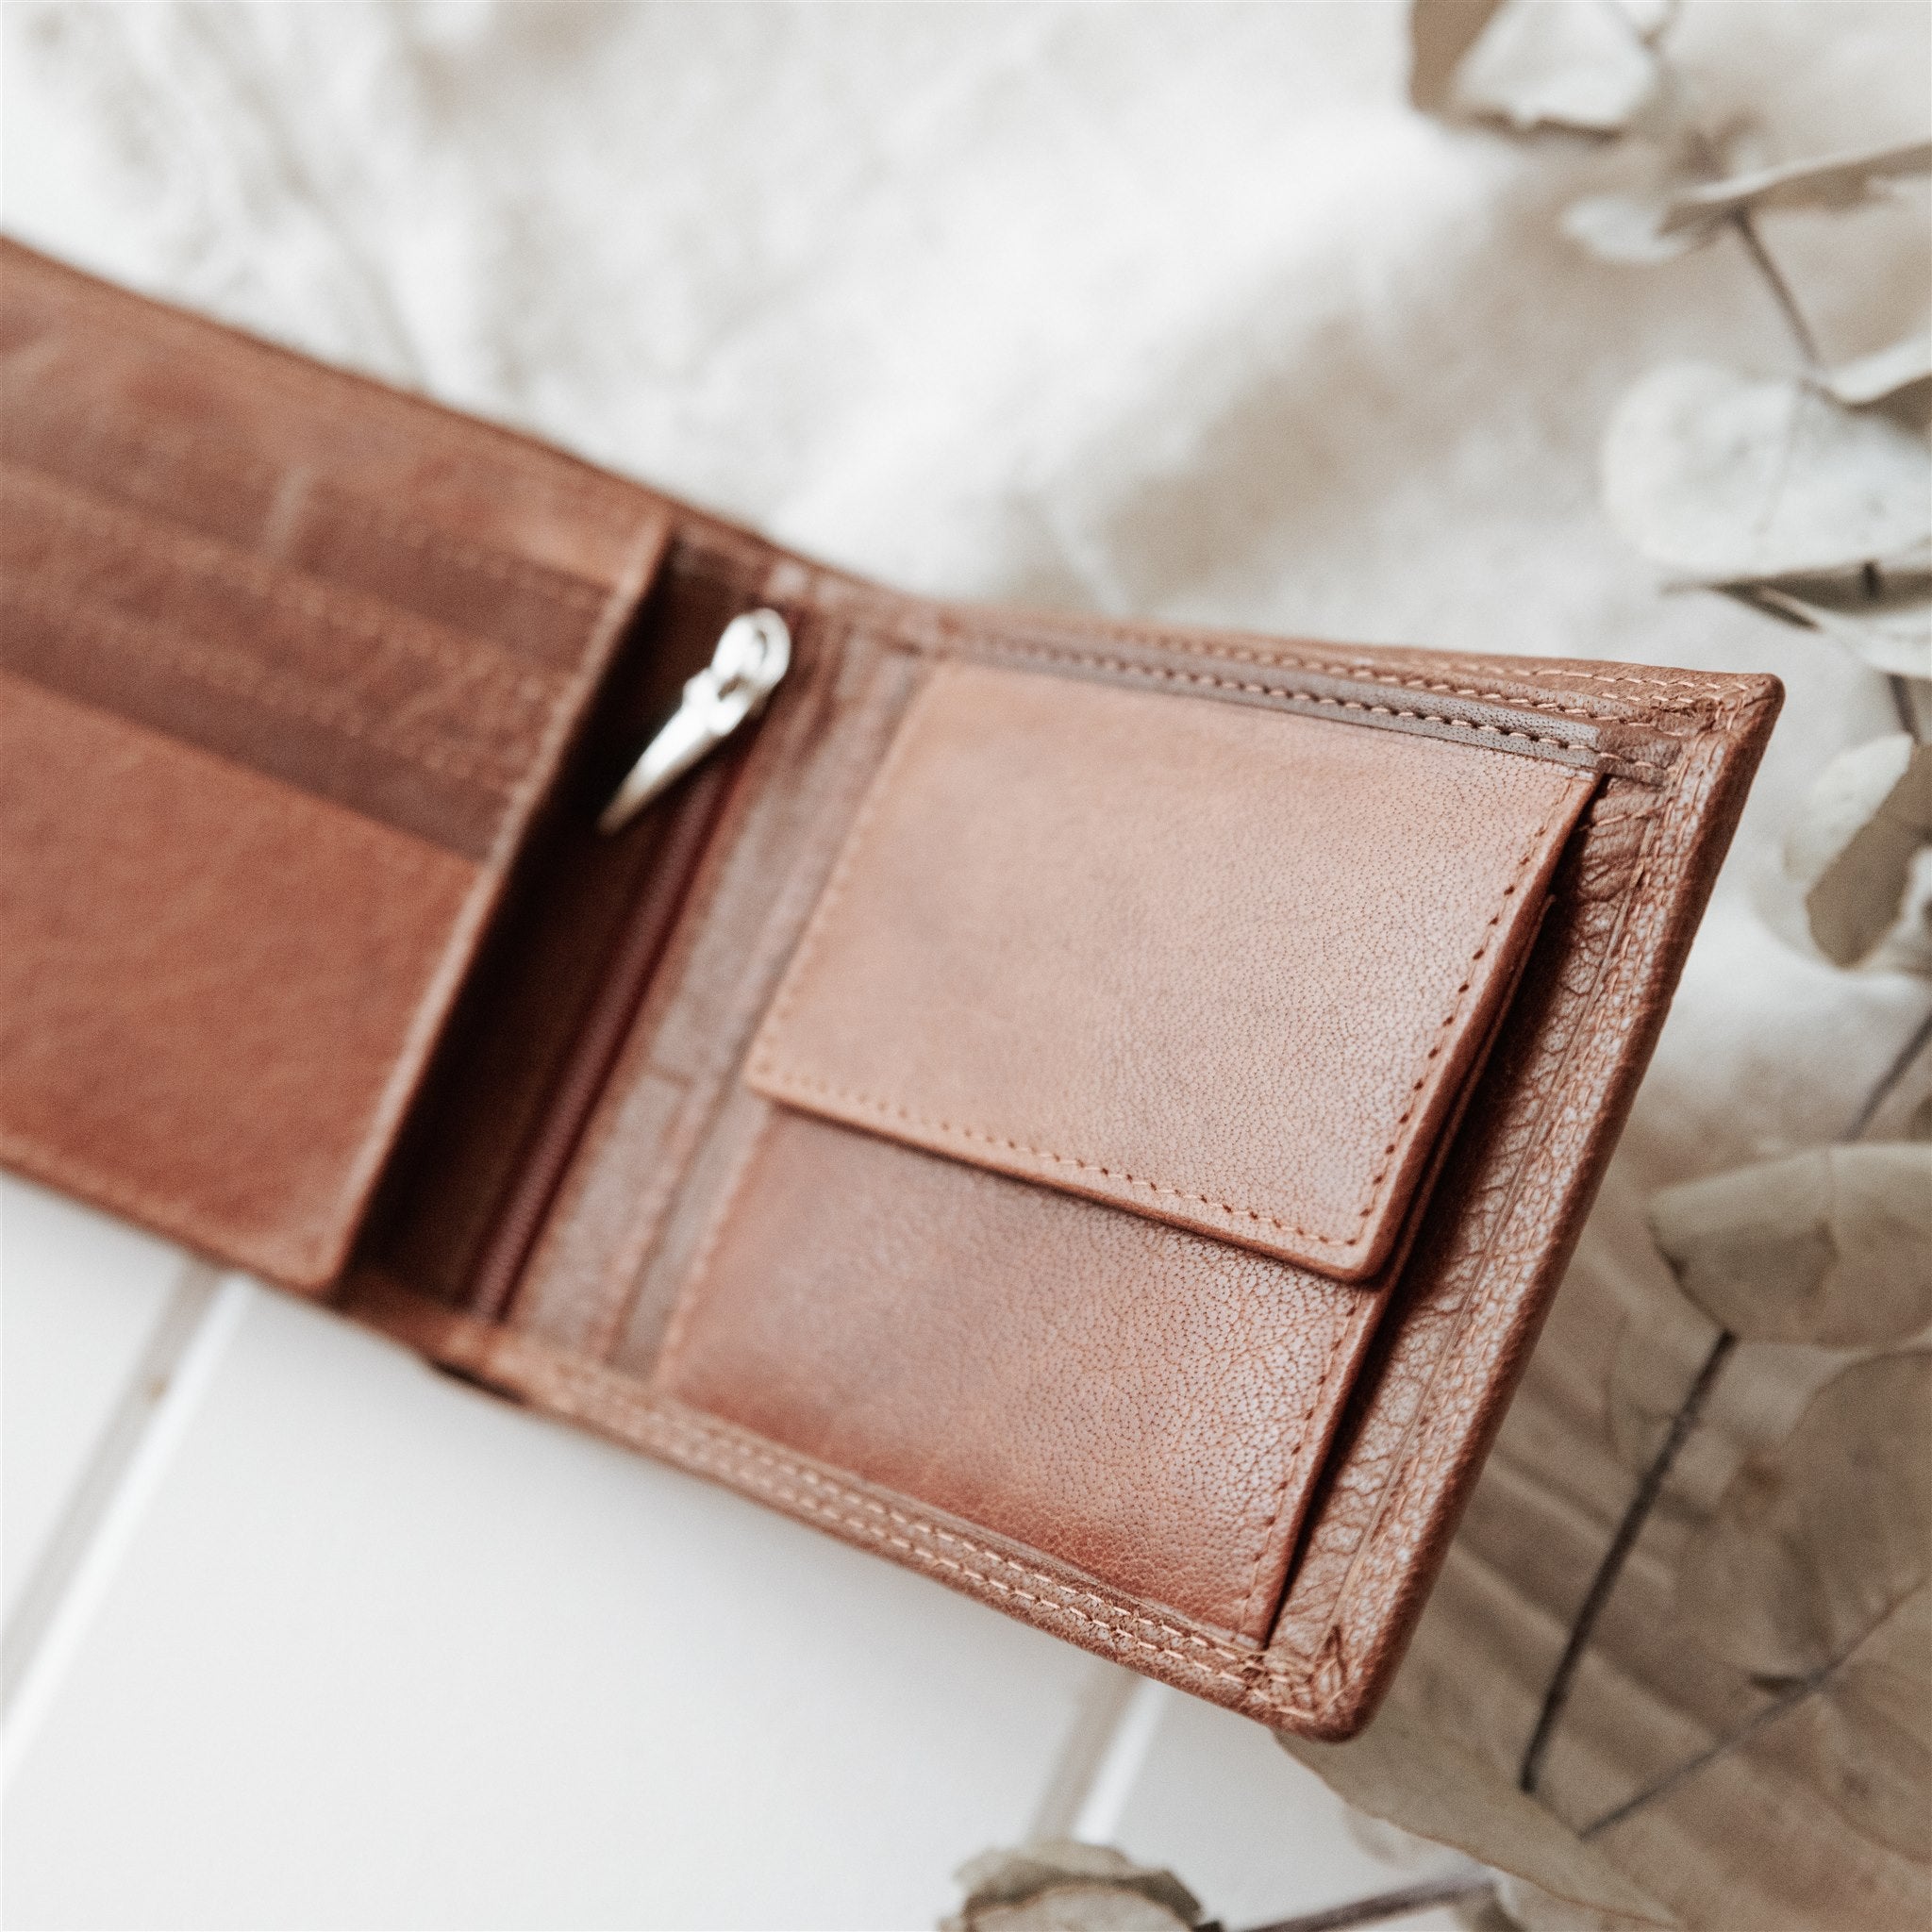 Leather Wallet - Tan